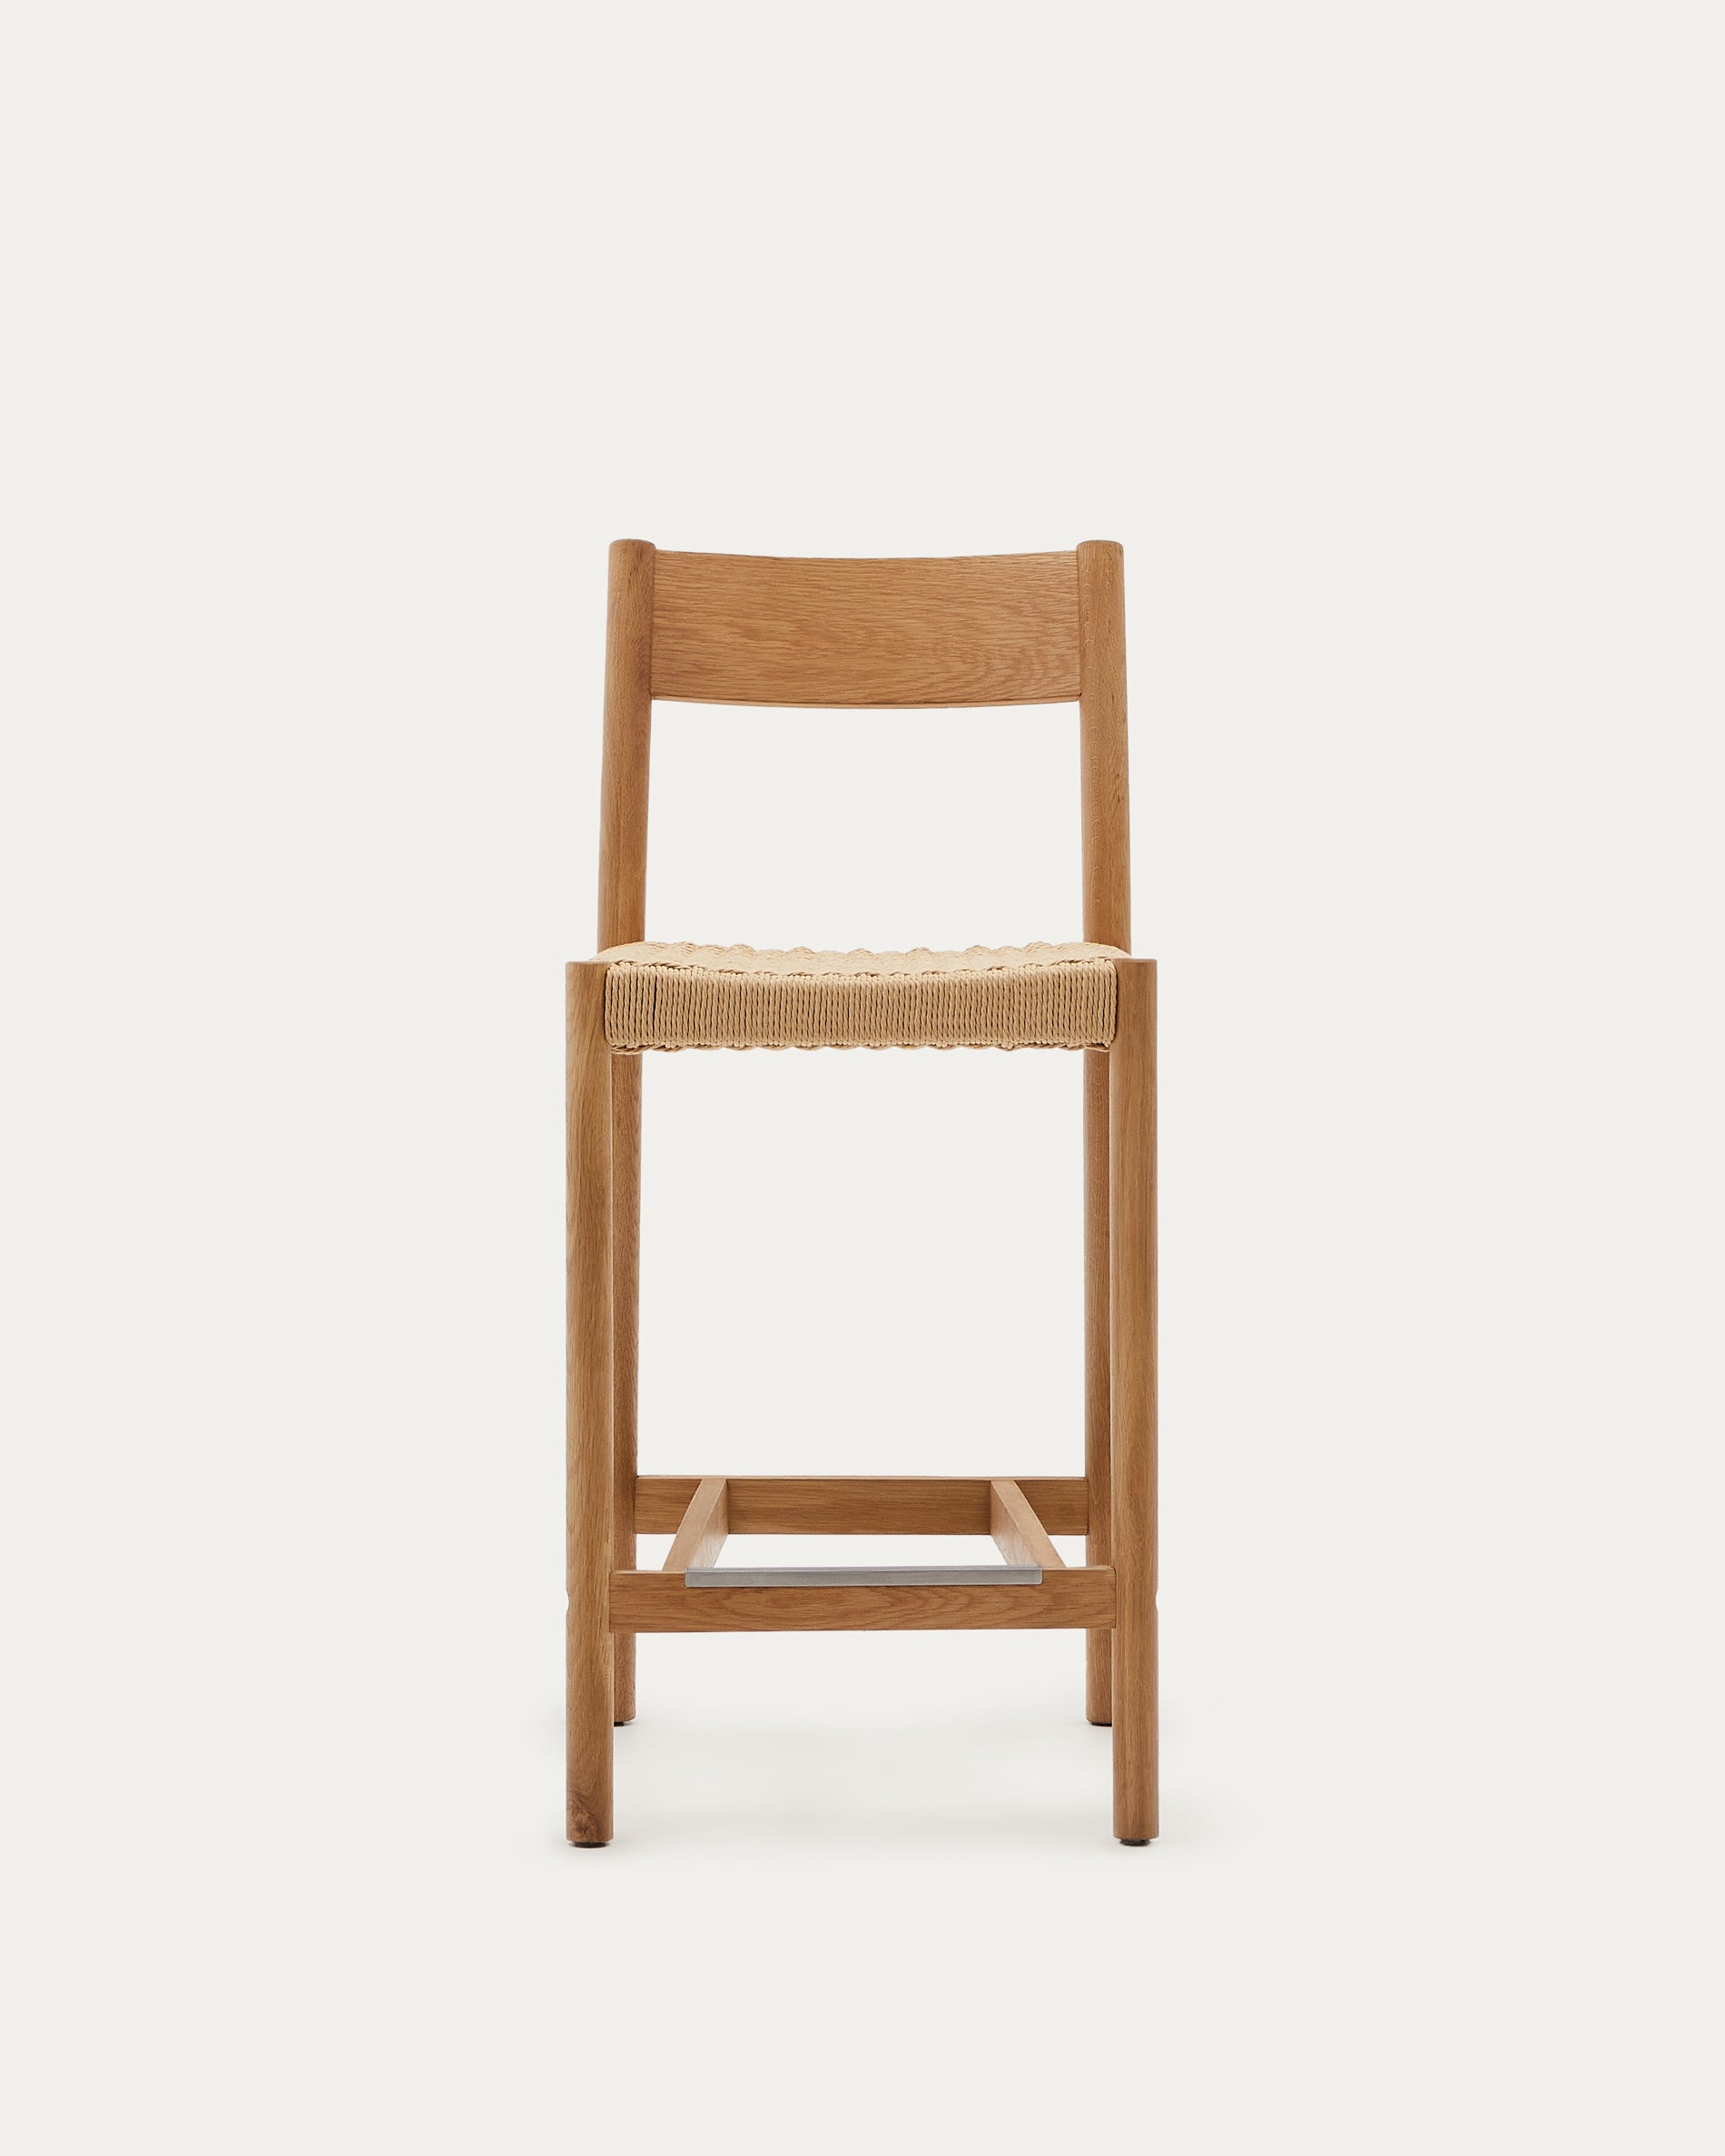 Yalia chair with back, solid oak with natural finish and rope seat, 65 cm 100% FSC